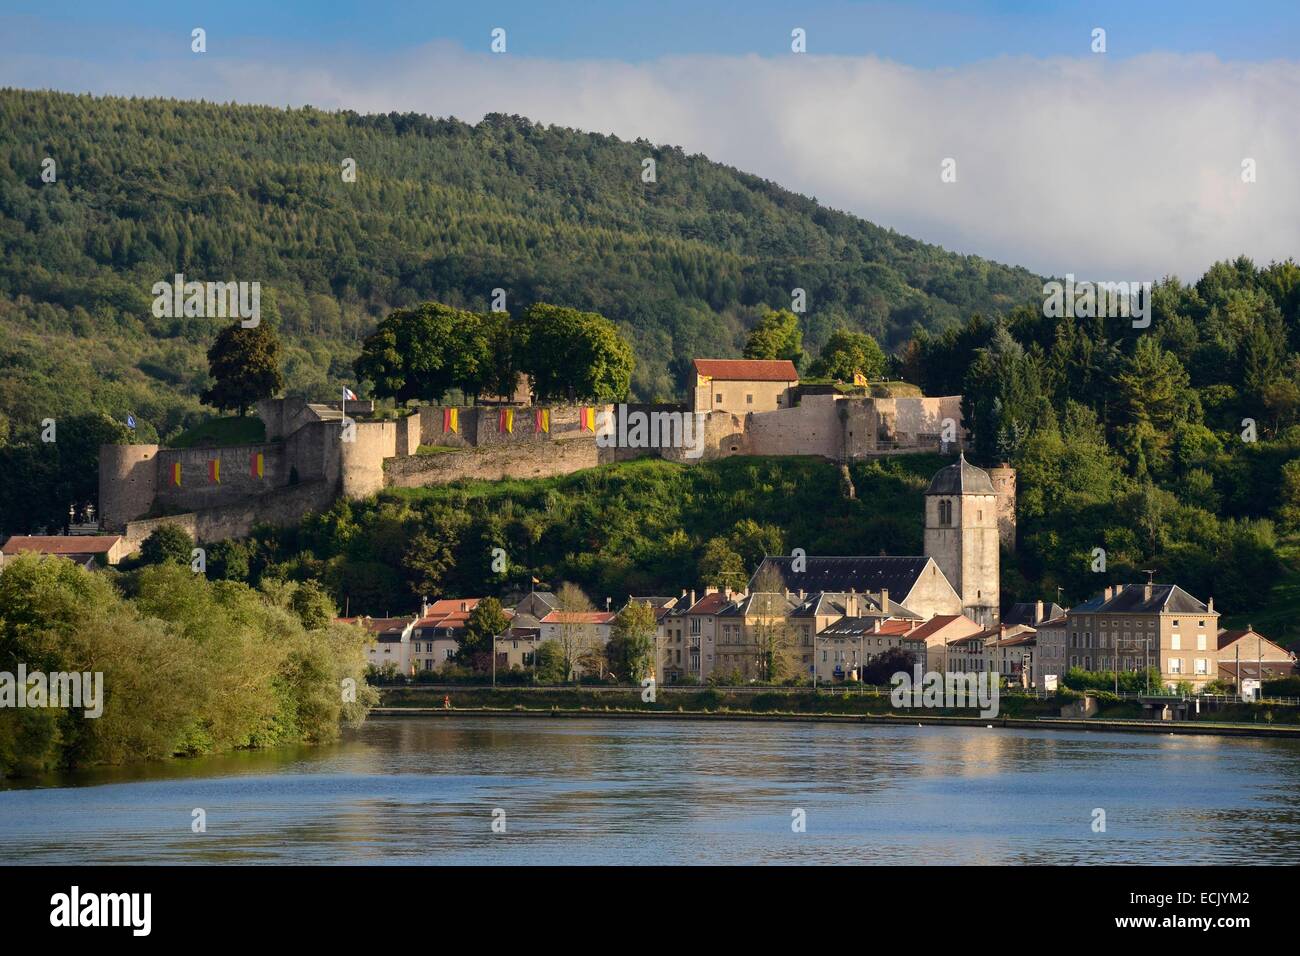 France, Moselle, Moselle Valley, Sierck les Bains on the Moselle River dominated by its Castle of the Dukes of Lorraine of the 12th century Stock Photo